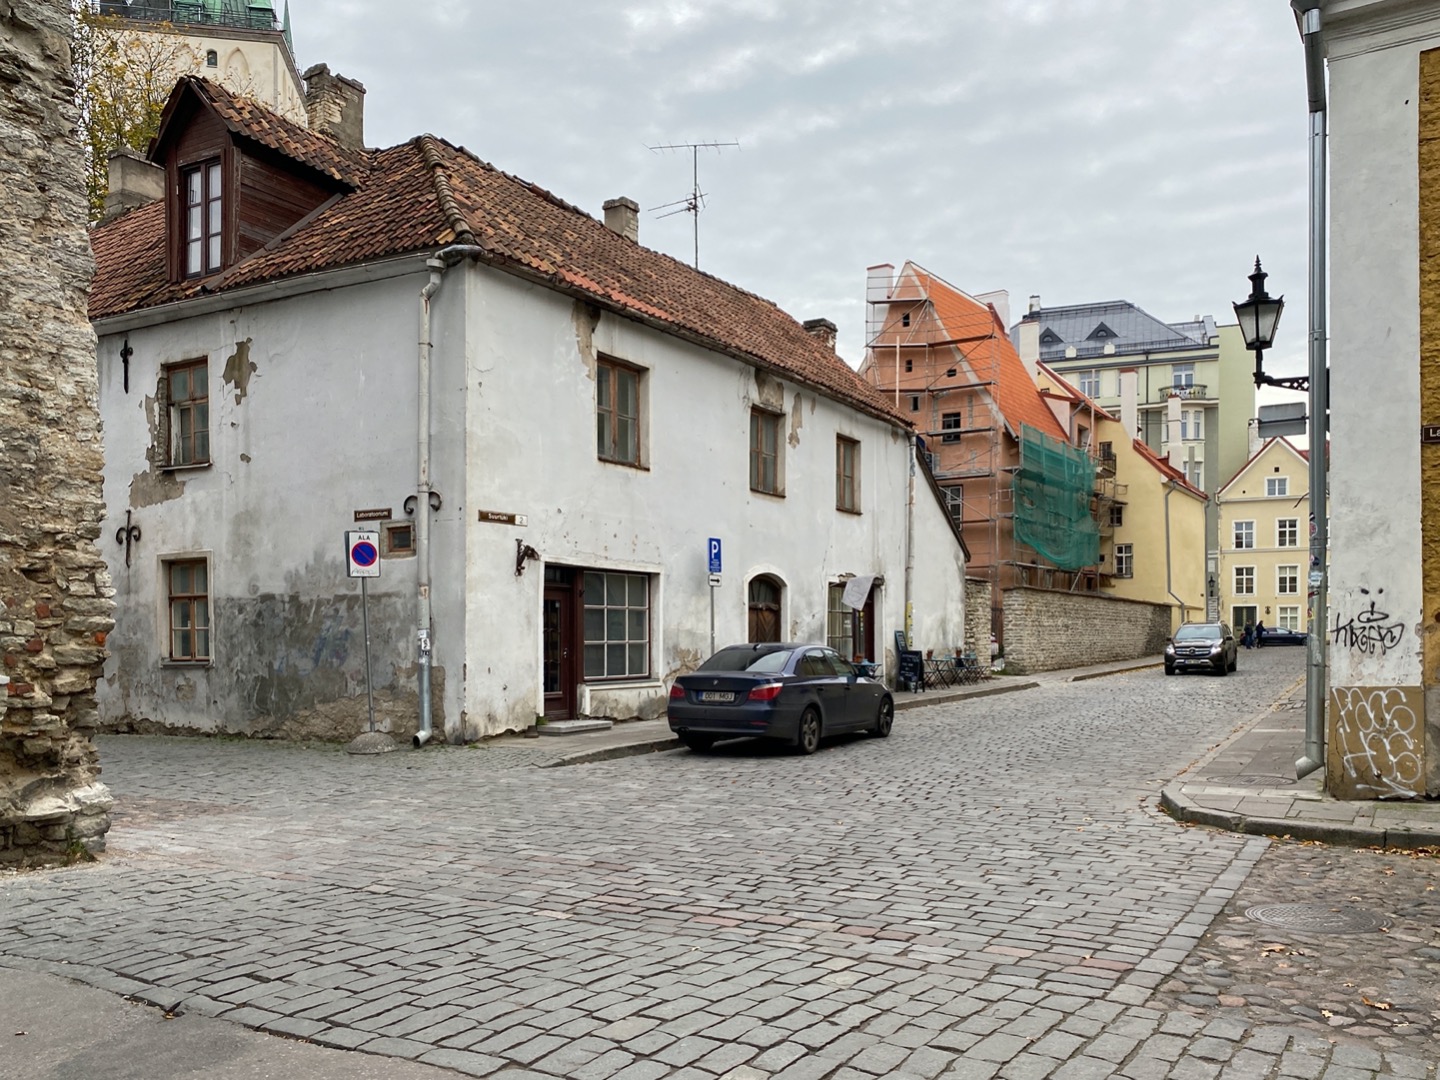 The corner of the artillery and Laboratory Street in the Old Town of Tallinn rephoto